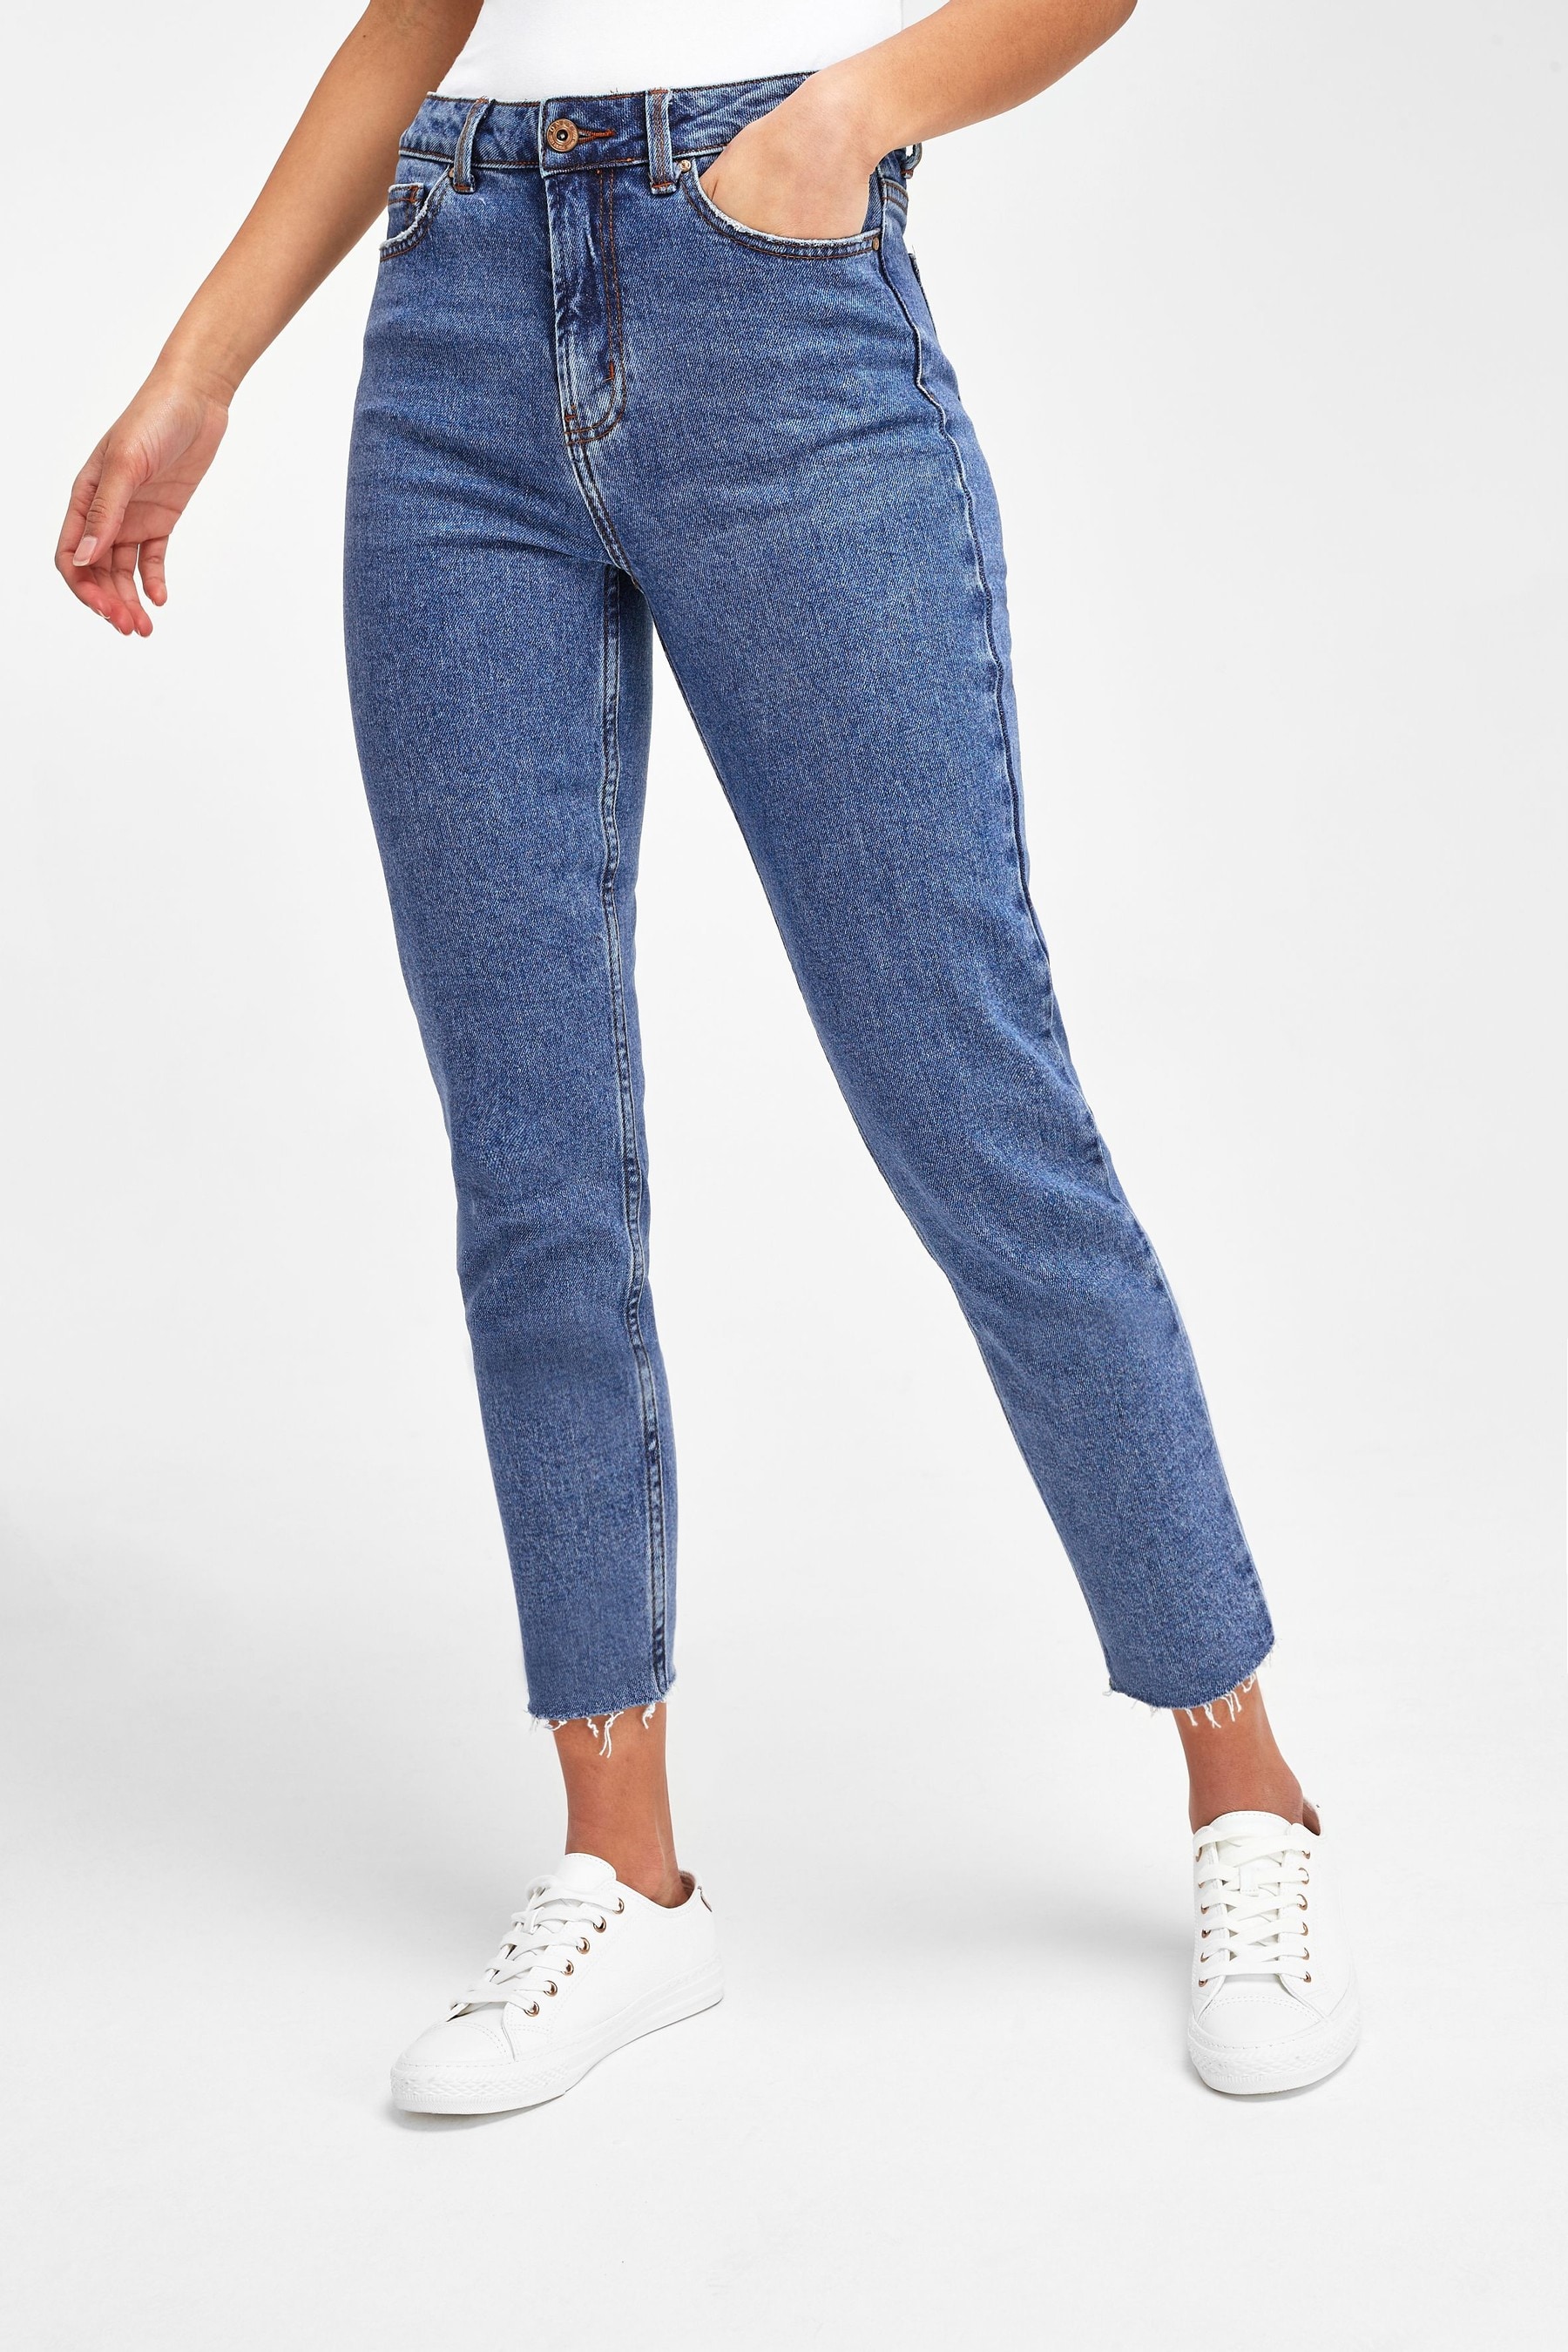 Buy ONLY Blue High Waist Cropped Straight Jeans from the Next UK online ...